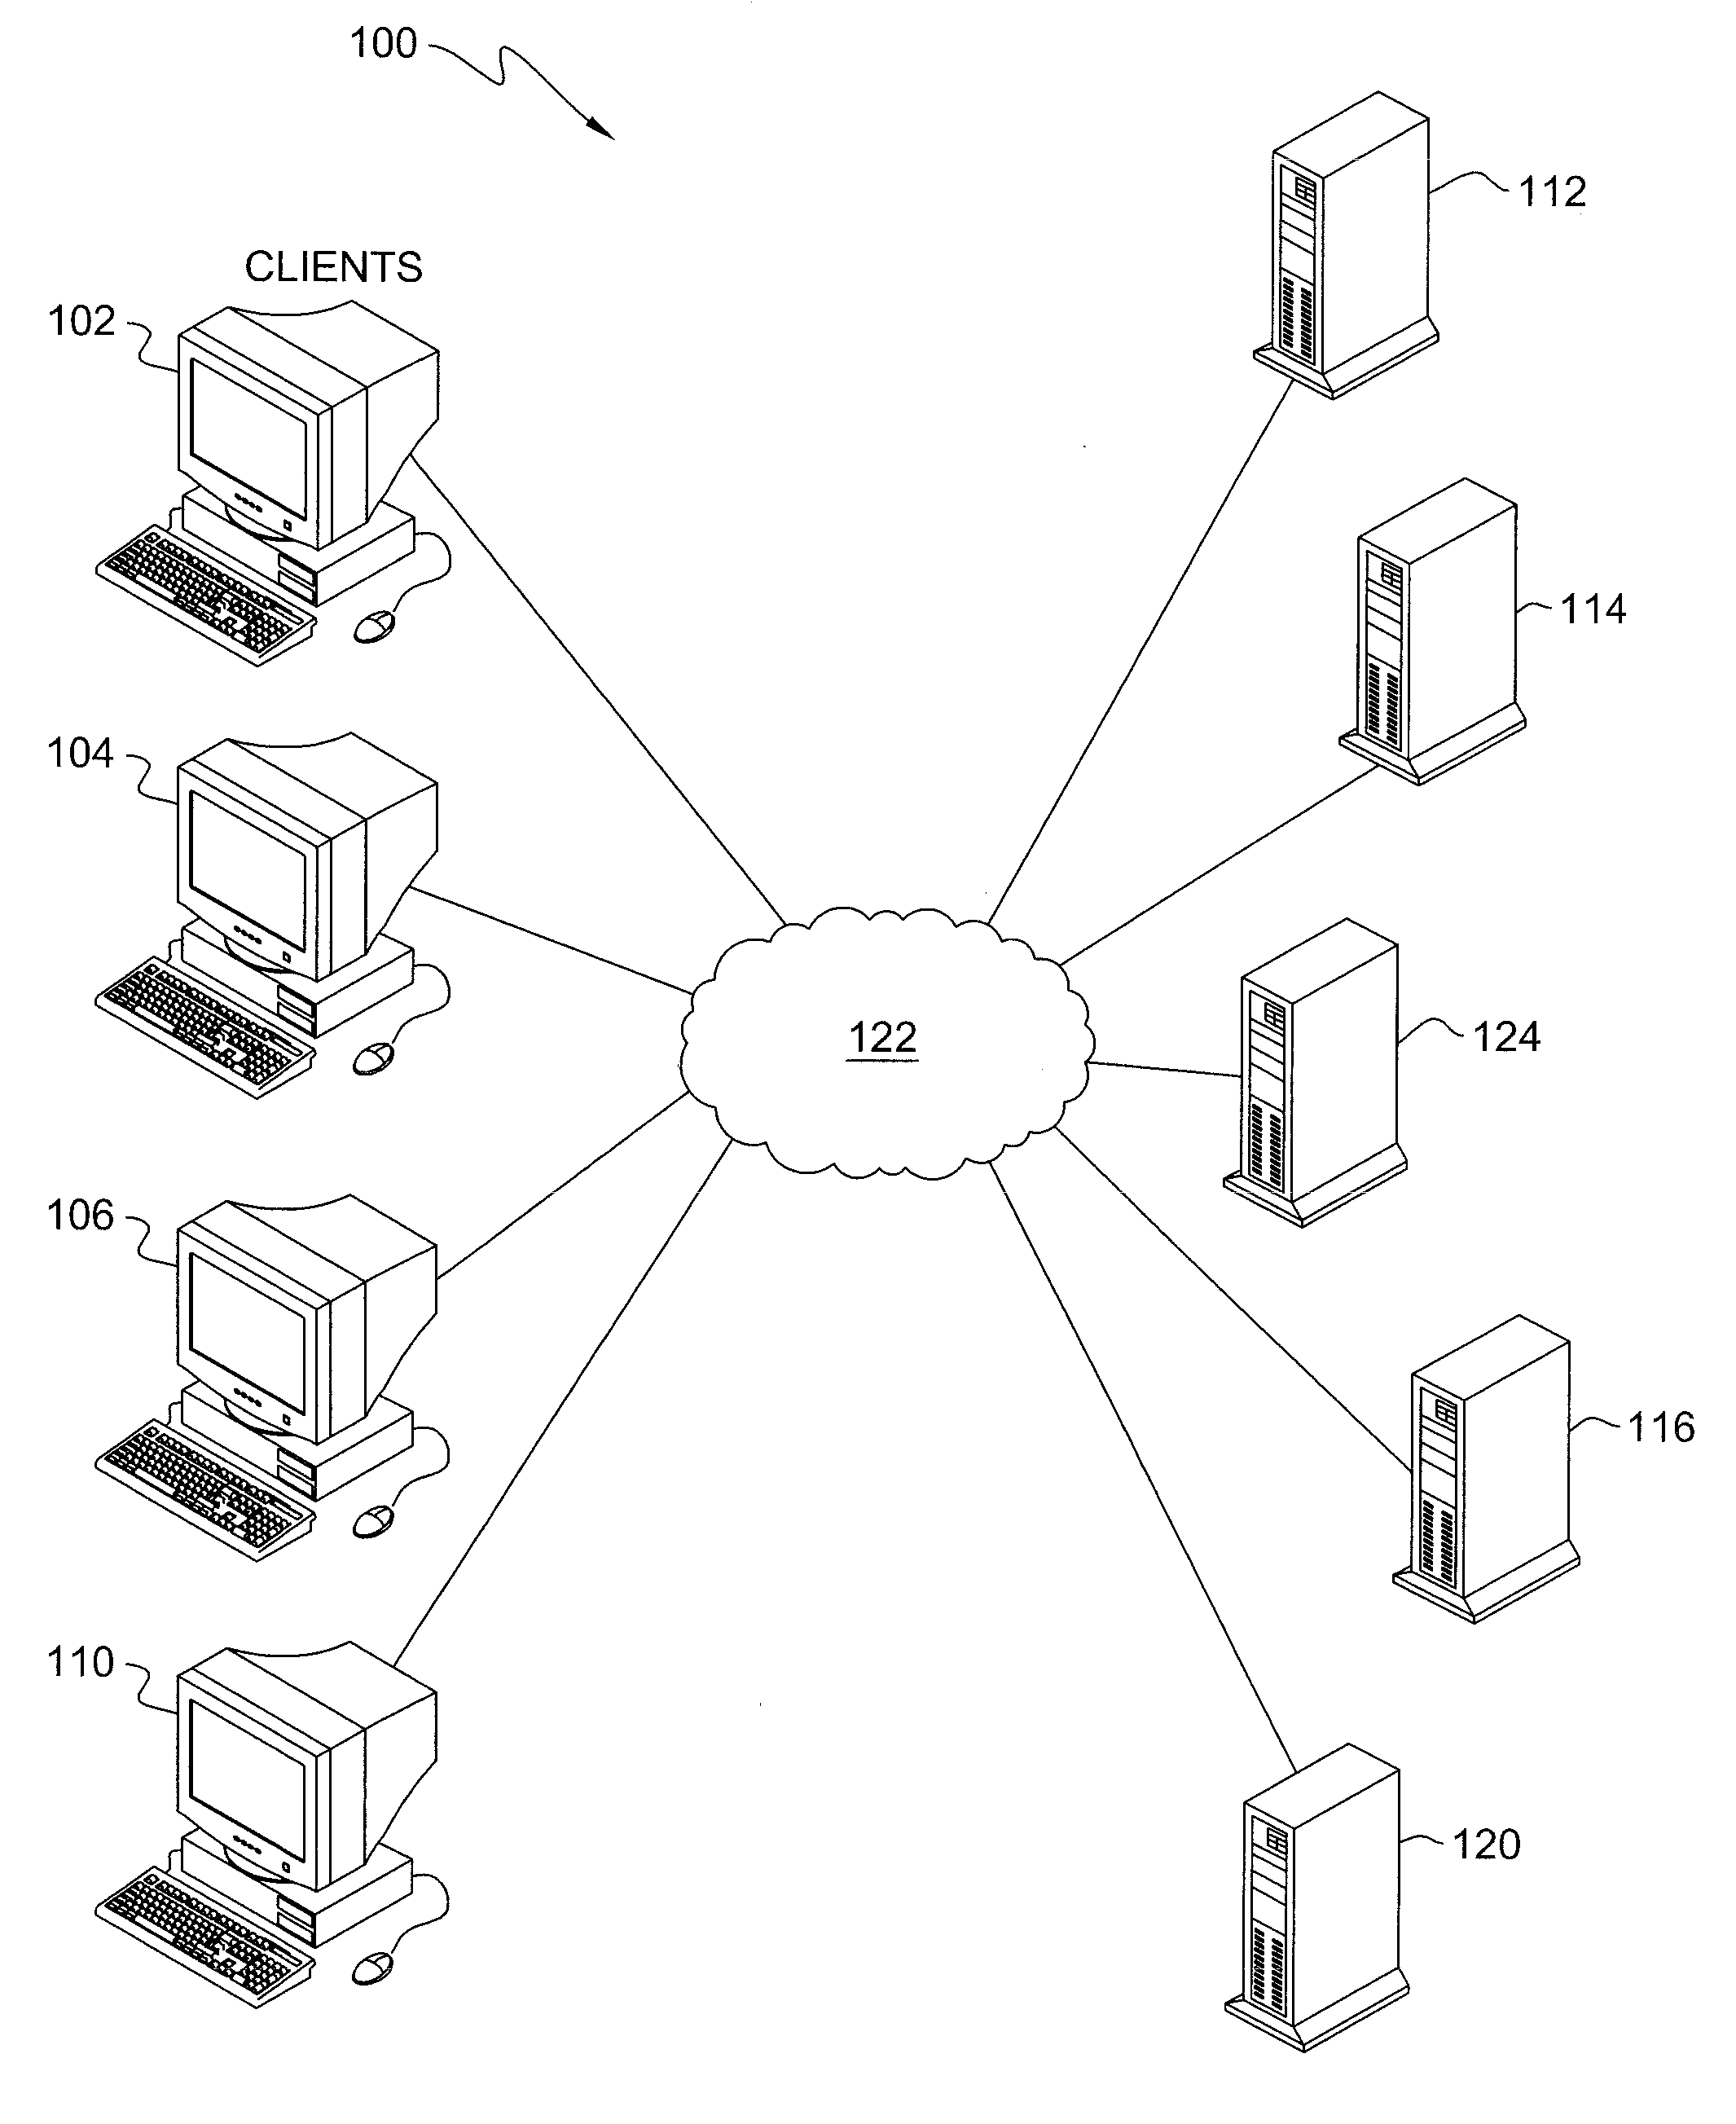 Efficient selection of a messaging multiplexed channel instance